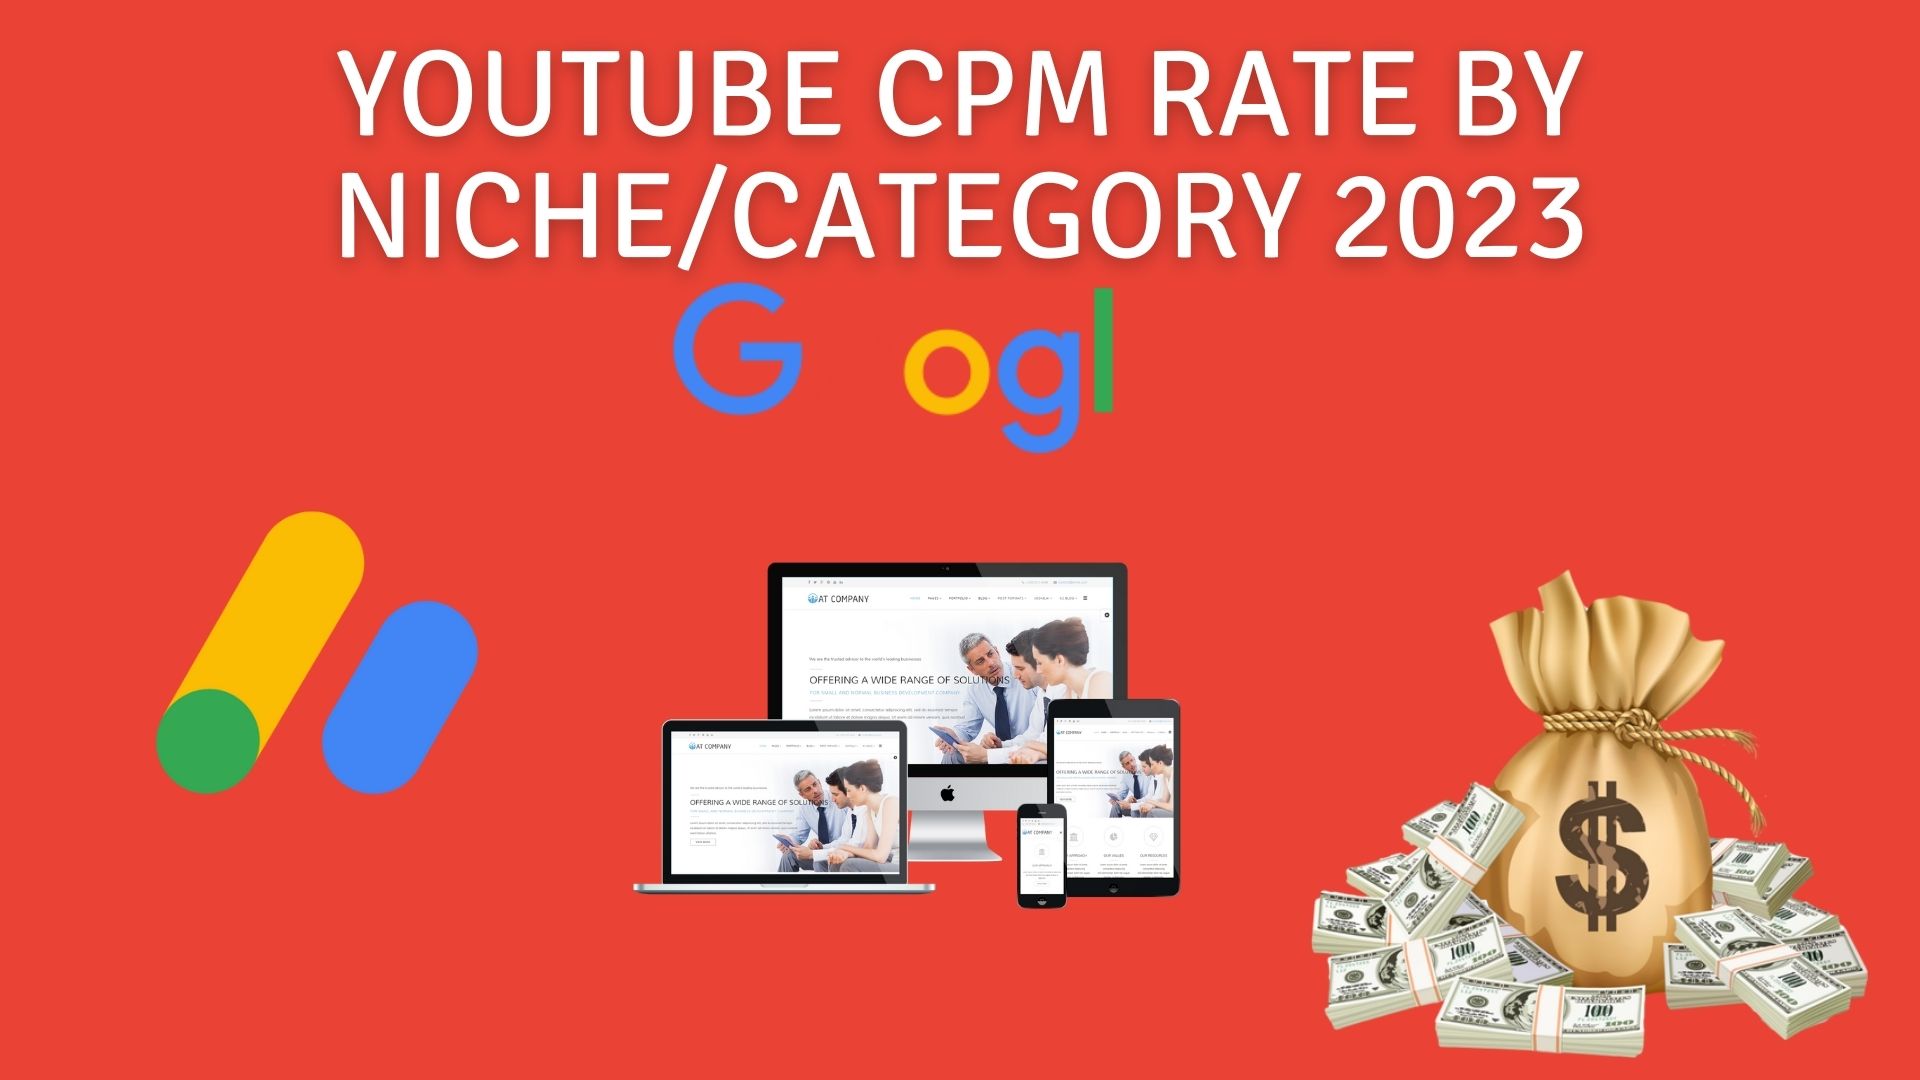 Youtube cpm rate by niche/category 2023